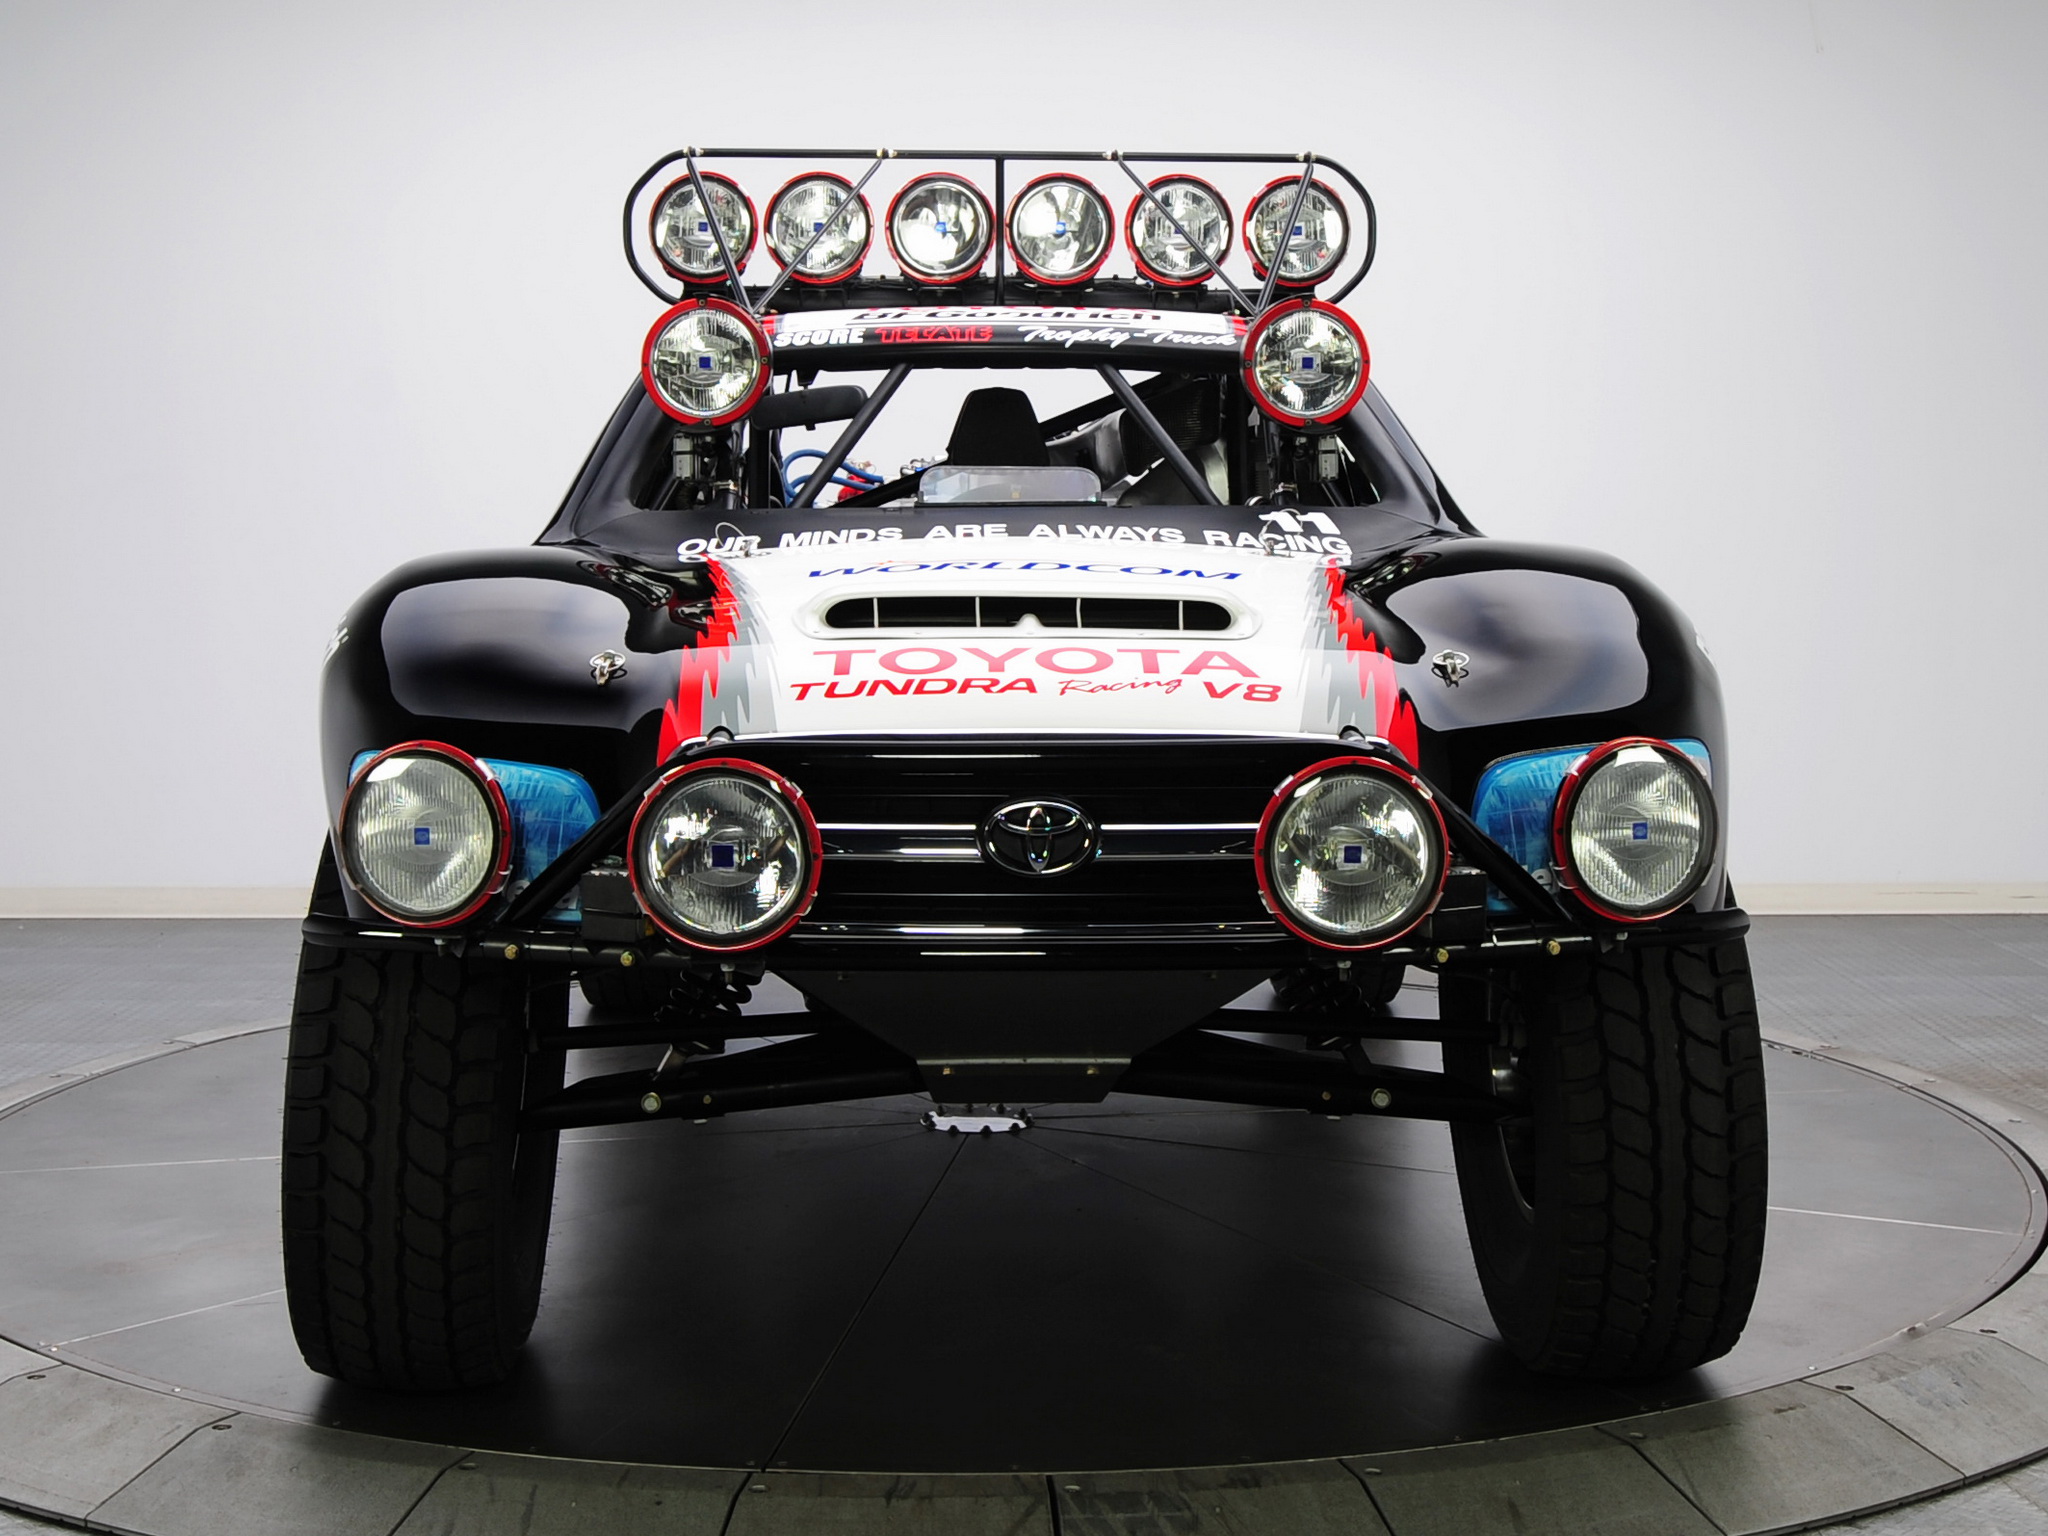 1994, Ppi, Toyota, Trophy, Truck, Race, Racing, Offroad, Pickup Wallpaper